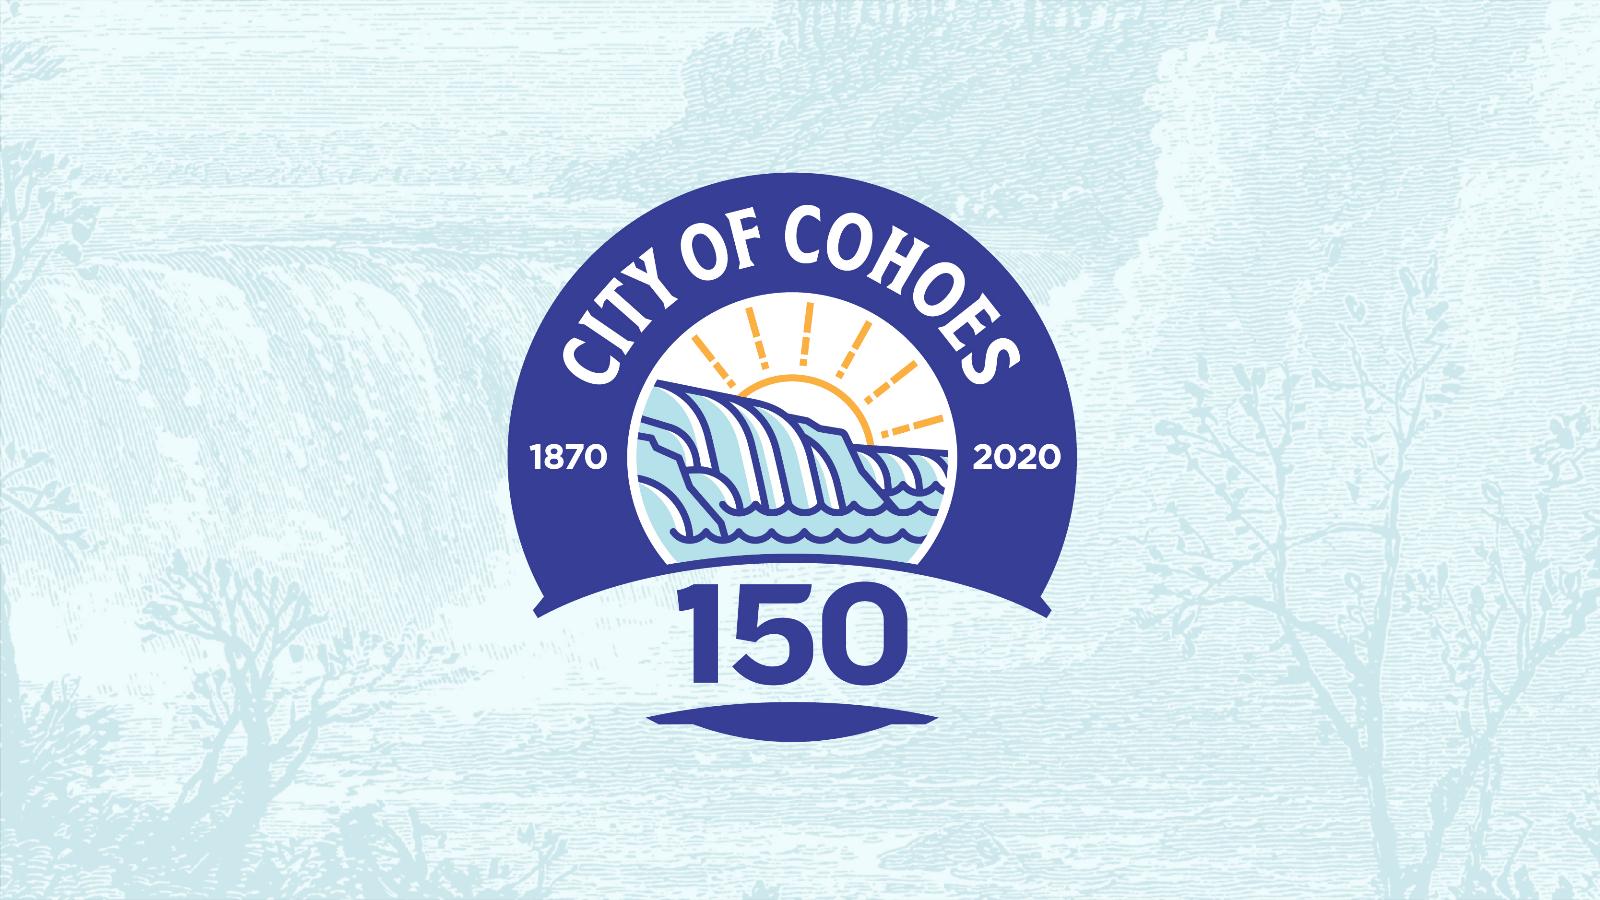 Logo Design & Brand Identity | City of Cohoes